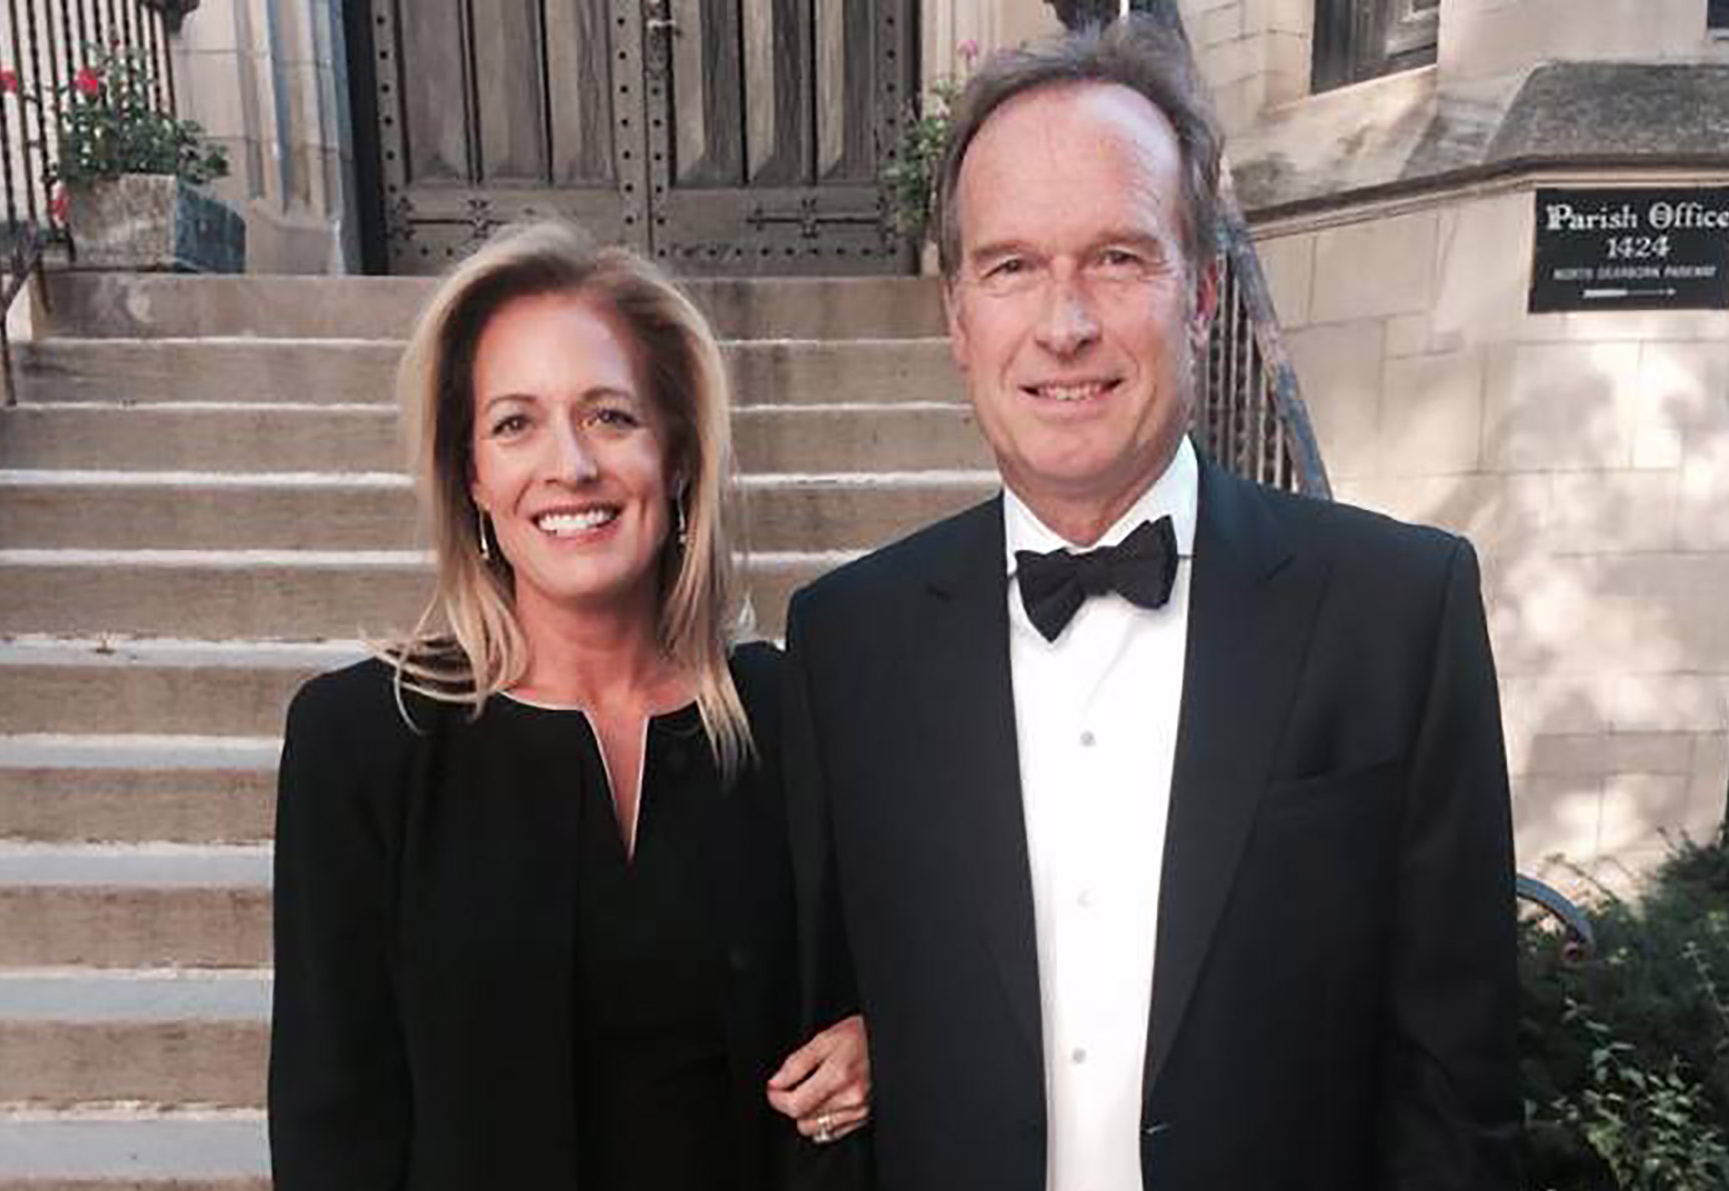 Envestnet Mourns the Sudden Passing of CEO Jud Bergman and Wife